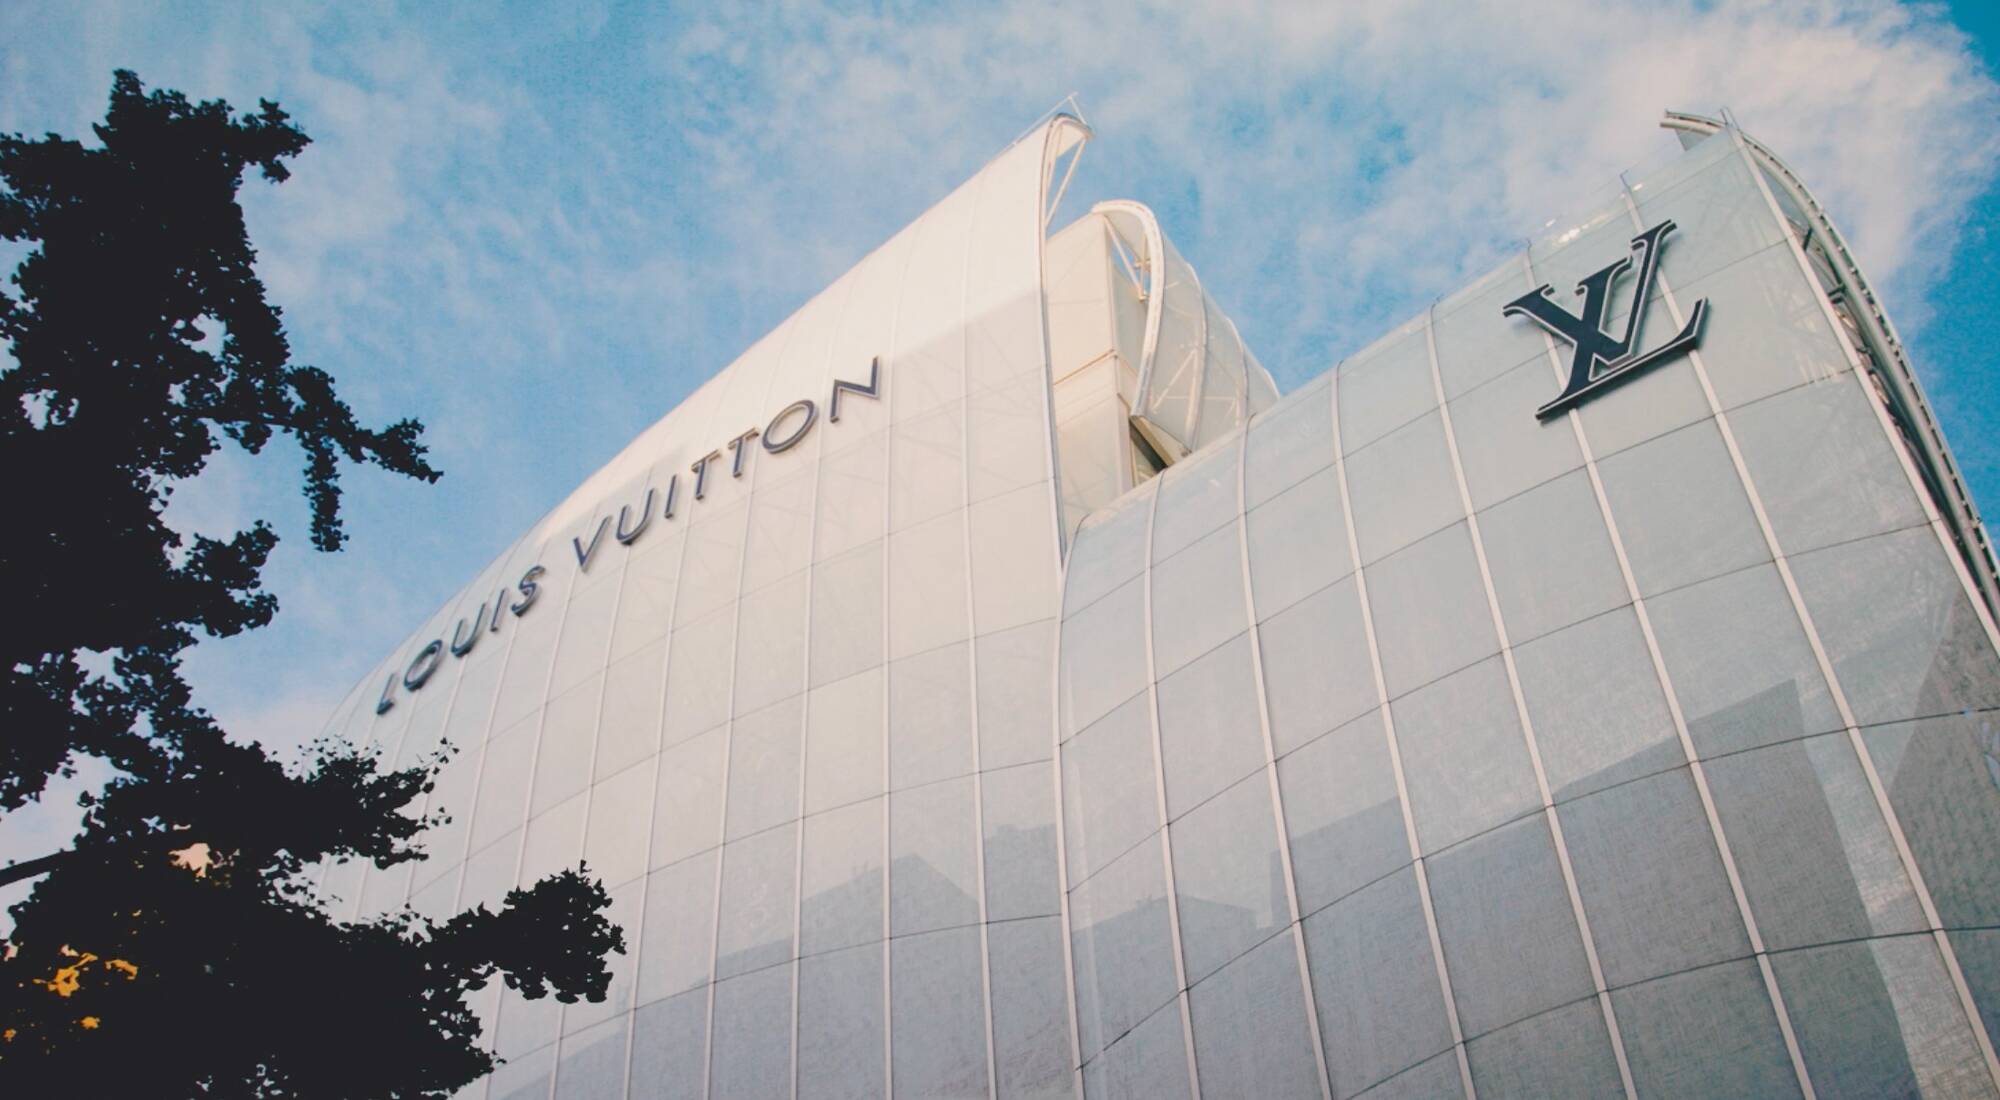 Louis vuitton - The Vision of Future of Tradition